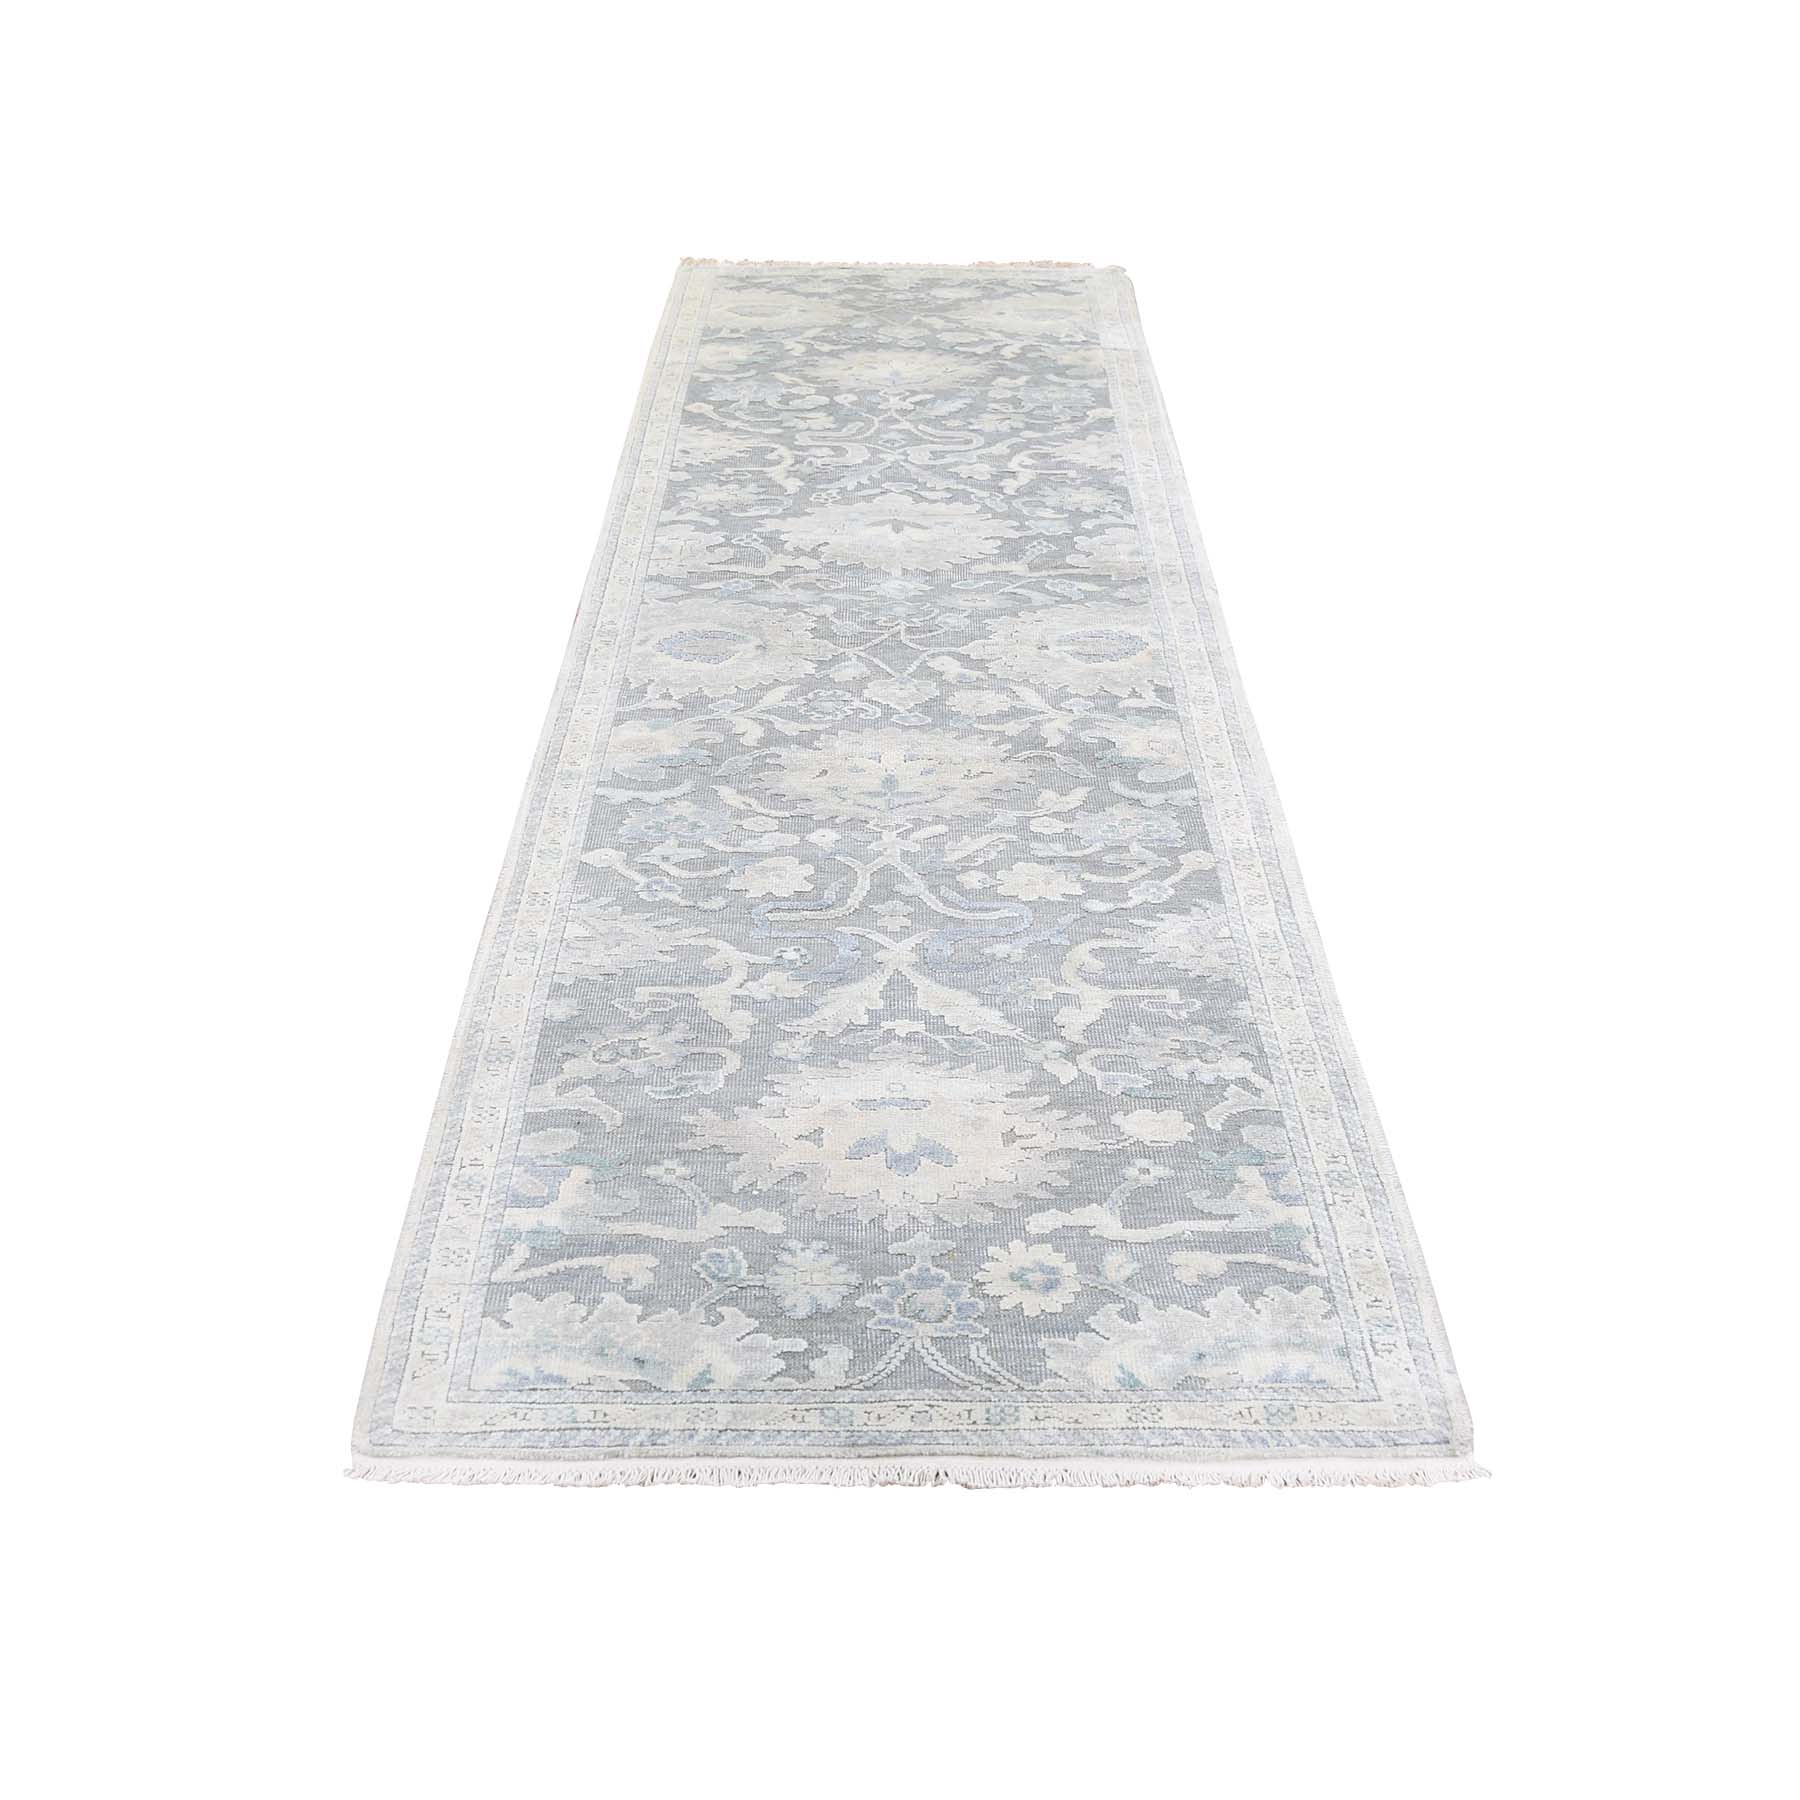 Transitional Silk Hand-Knotted Area Rug 2'6